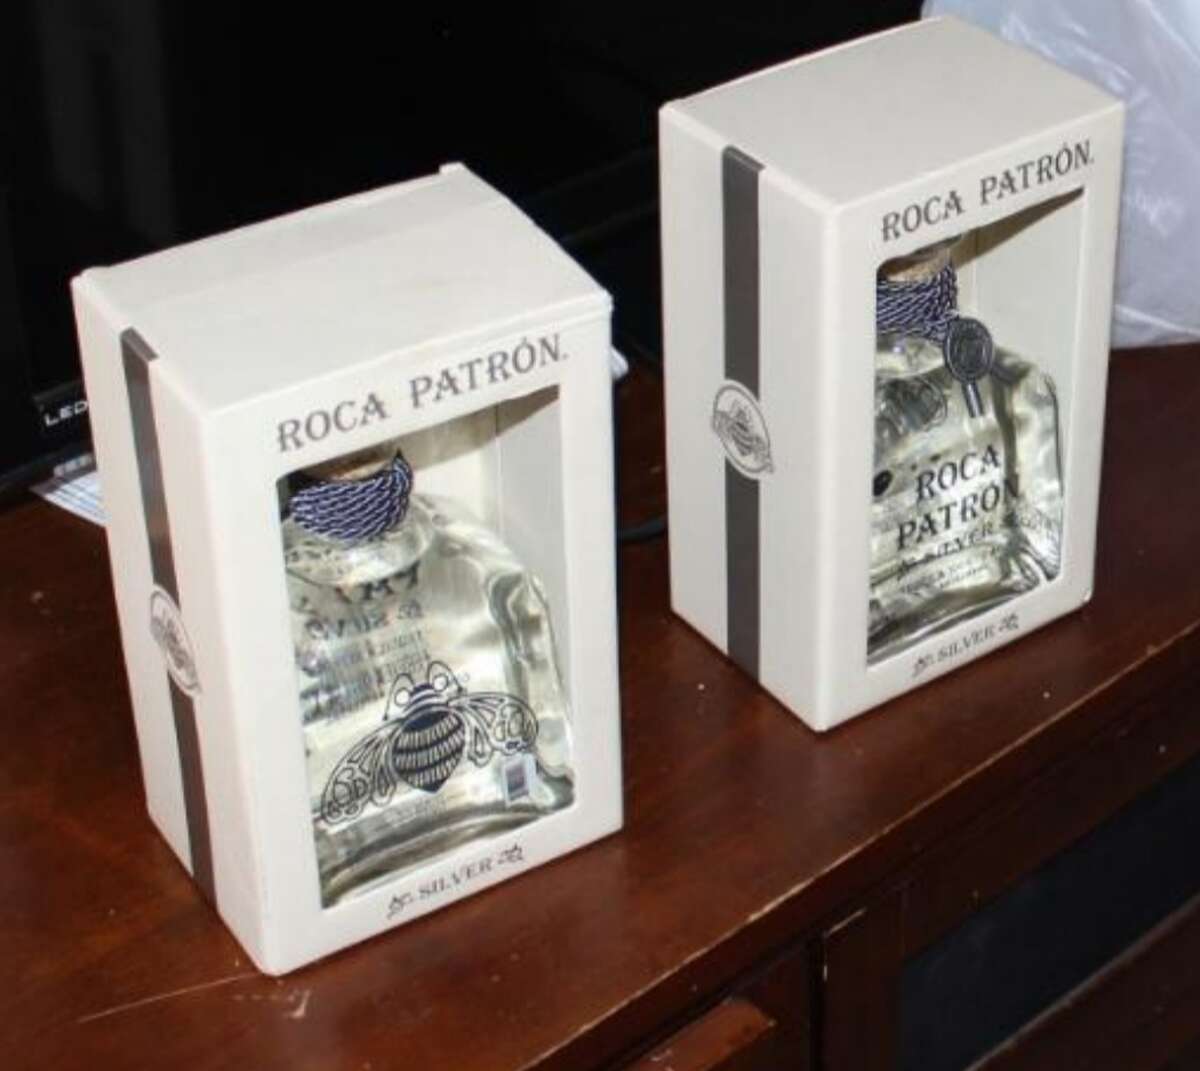 Police recovered 29 cases of Roca Patron Silver worth $11,310 and arrested a man who is allegedly linked to the cargo theft.